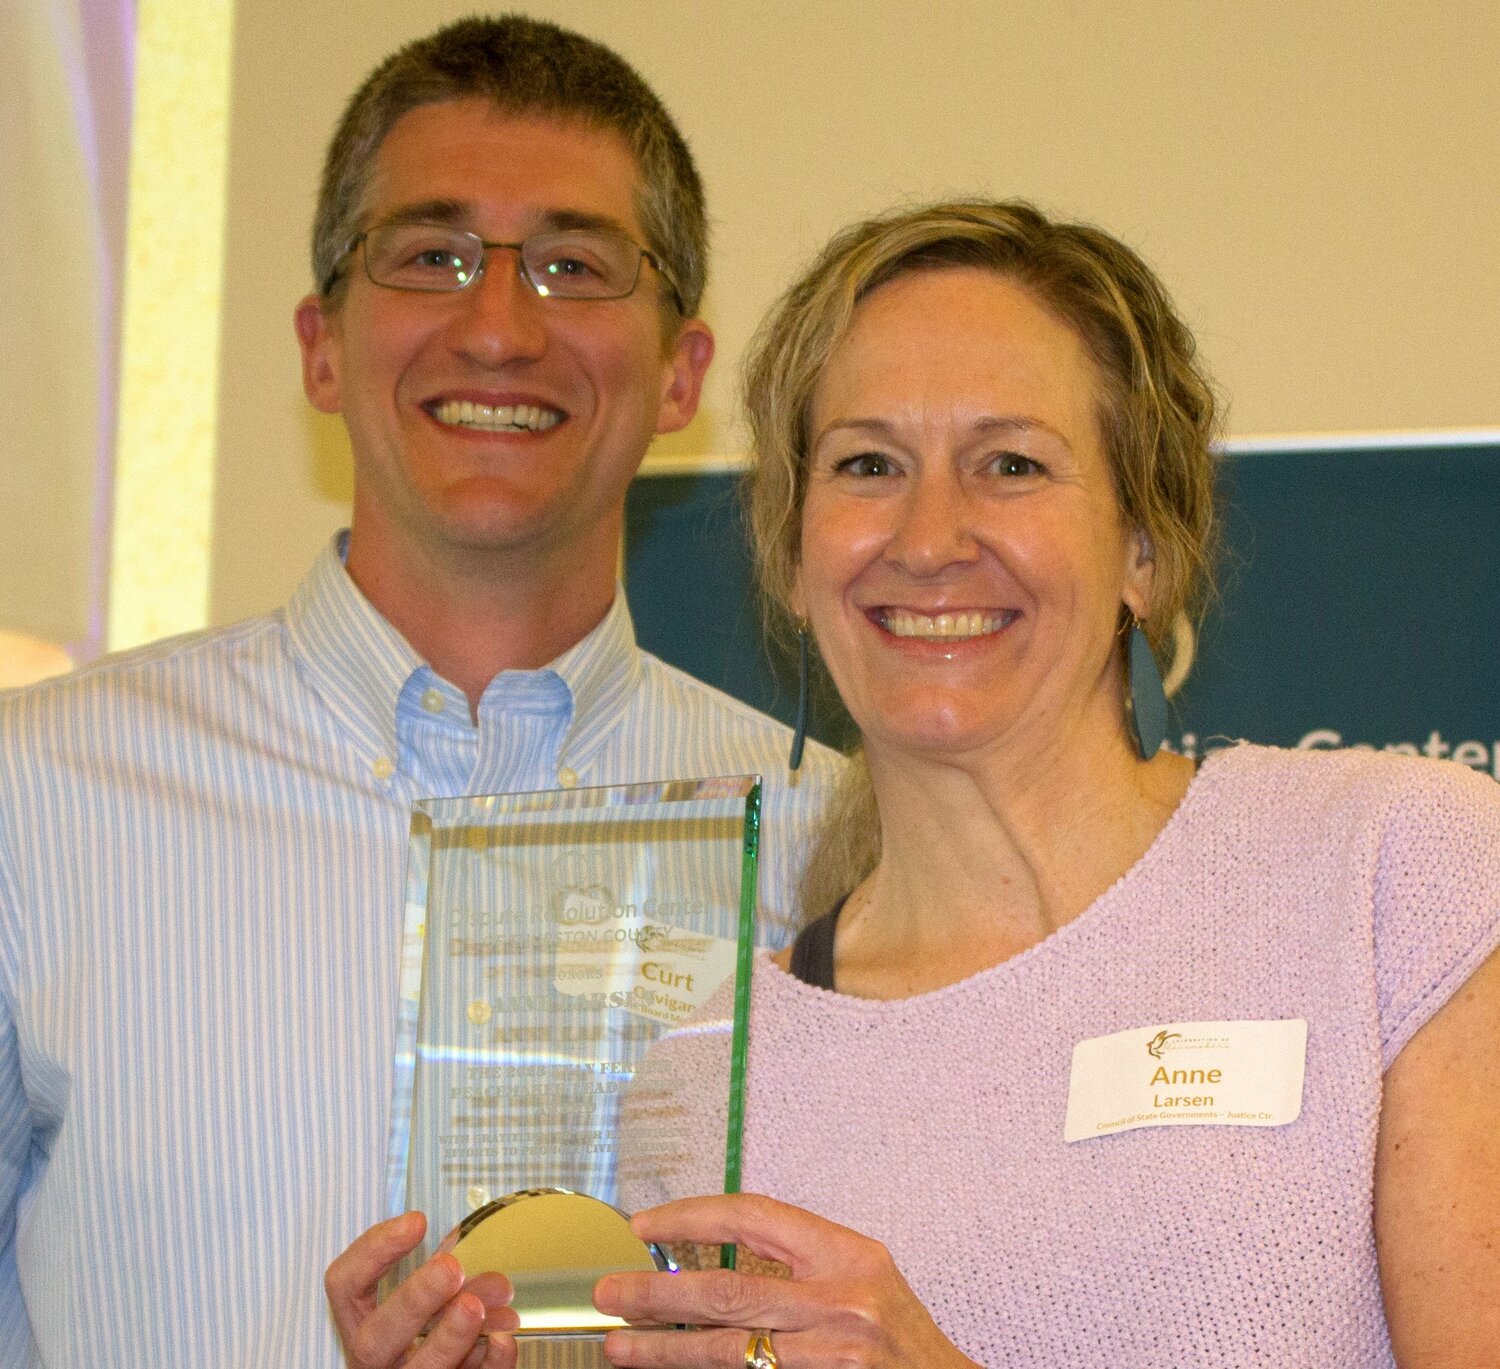 Anne Larsen received the Peacemaker Award from DRC Board Vice President Curt Gavigan at DRC Peacemaker Celebration event on May 7, 2023.